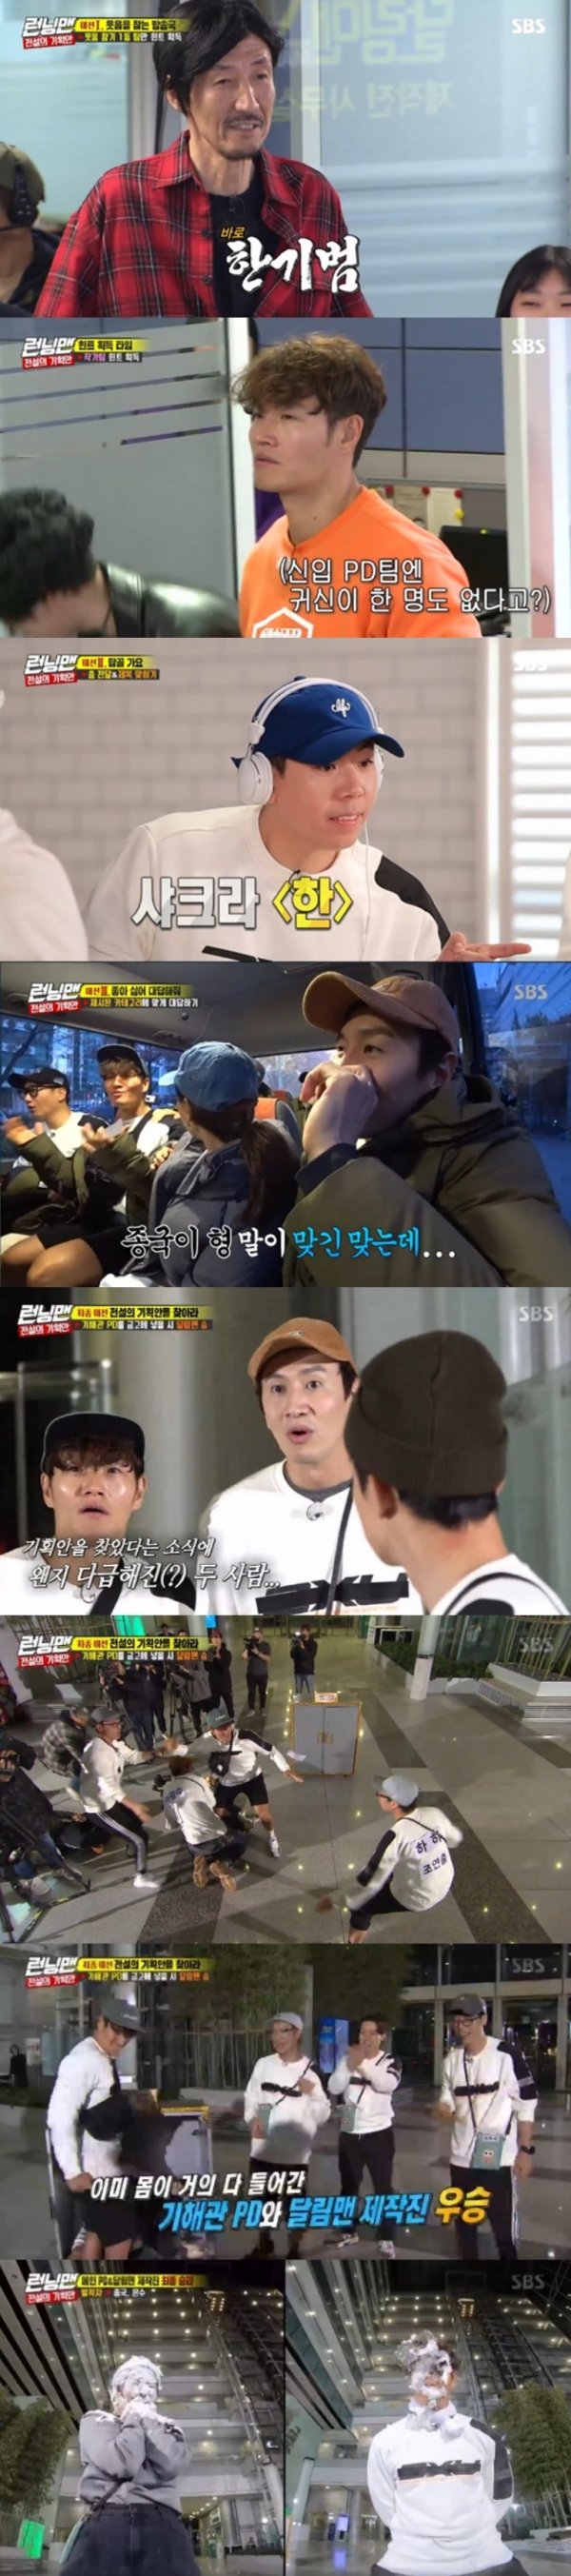 The Identity of SBS Running Man was Seo Eun-soo and Kim Jong-kook.According to Nielsen Korea, a TV viewer rating research institute, Running Man, which was broadcast on the 24th, ranked first in entertainment at the same time zone, surpassing Masked Wang and Donkey Ears as the main indicator of major advertising officials, with 4% of 2049 Target TV viewer ratings (based on the second part of the Seoul Metropolitan areas furniture TV viewer ratings). ...The average TV viewer ratings were 5.7% in the first part and 7.5% in the second part, while the highest TV viewer ratings per minute soared to 9.2%.The broadcast was decorated with the Legendary Plan Race, which followed last week, and the members struggle to find Kolocki and the angle was drawn.With Godseven camp, actor Seo Eun-soo, Choi Lee, and comedian Hur Kyung-hwan as guests, the members were divided into PD, writer, and new PD team of the Running Man program and challenged the first mission, Broadcasting for Laughing.The members burst into laughter bombings from the melon navel tool uncle to Yondu general manager, and Han Ki-bum, who appeared in Laughing Inclusion Race last time, appeared as a wedge-biting three-member girl group Hans Band and held a big laughing bomb.The writer team was able to get the hint by laughing the least, and the writer team found that the new PD team had no collocide with Kollok.The second mission Topgol Song was a mission to hit the hit choreography of the hit song, but the members failed to get hints due to successive failures.The third round was played out against the background of the station, and Koloki and the other members were immersed in identifying hints everywhere, but Koloki and the other members had to be eliminated.Starting with Chois elimination, which had been suspected by everyone, Jeon So-min, Song Ji-hyo, and Yang Se-chan were in-N-Out Burger, and Yoo Jae-Suk put Collock Seo Eun-soo in-N-Out Burger based on the hint that the assistant director is a woman.Now, with only the Identity of the Pick left, Kim Jong-kook and Lee Kwang-soo clashed.Lee Kwang-soo found out that the main PD had to go inside the safe and succeeded in the final mission.Kim Jong-kook and Seo Eun-soo were penalized for fresh cream as they ended with the victory of the Runman crew.